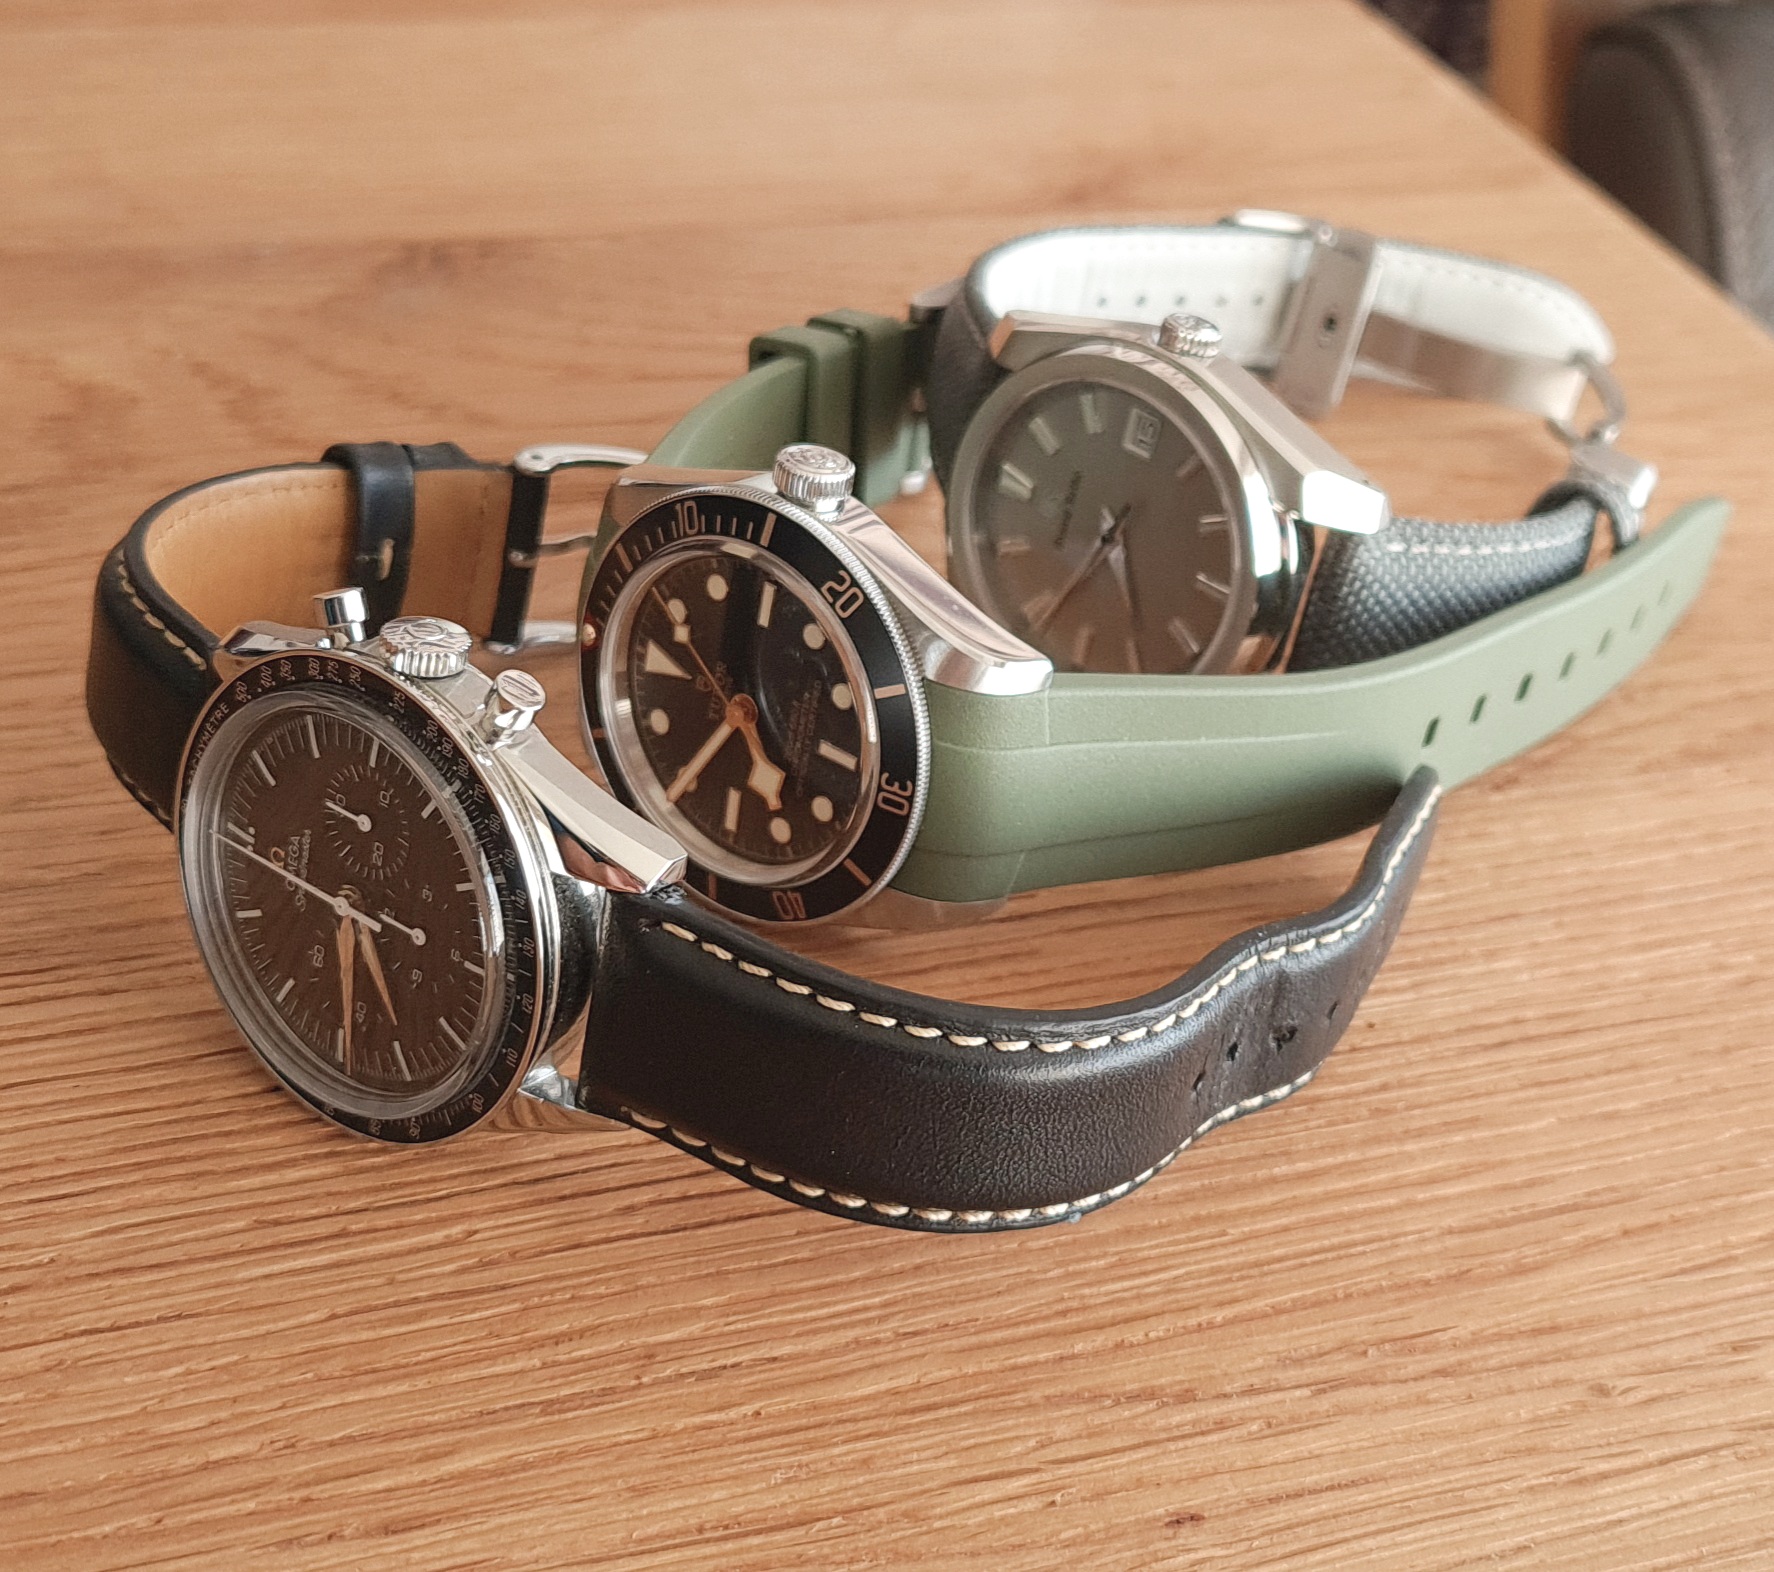 Let's see your Seikos! - Page 150 - Watches - PistonHeads